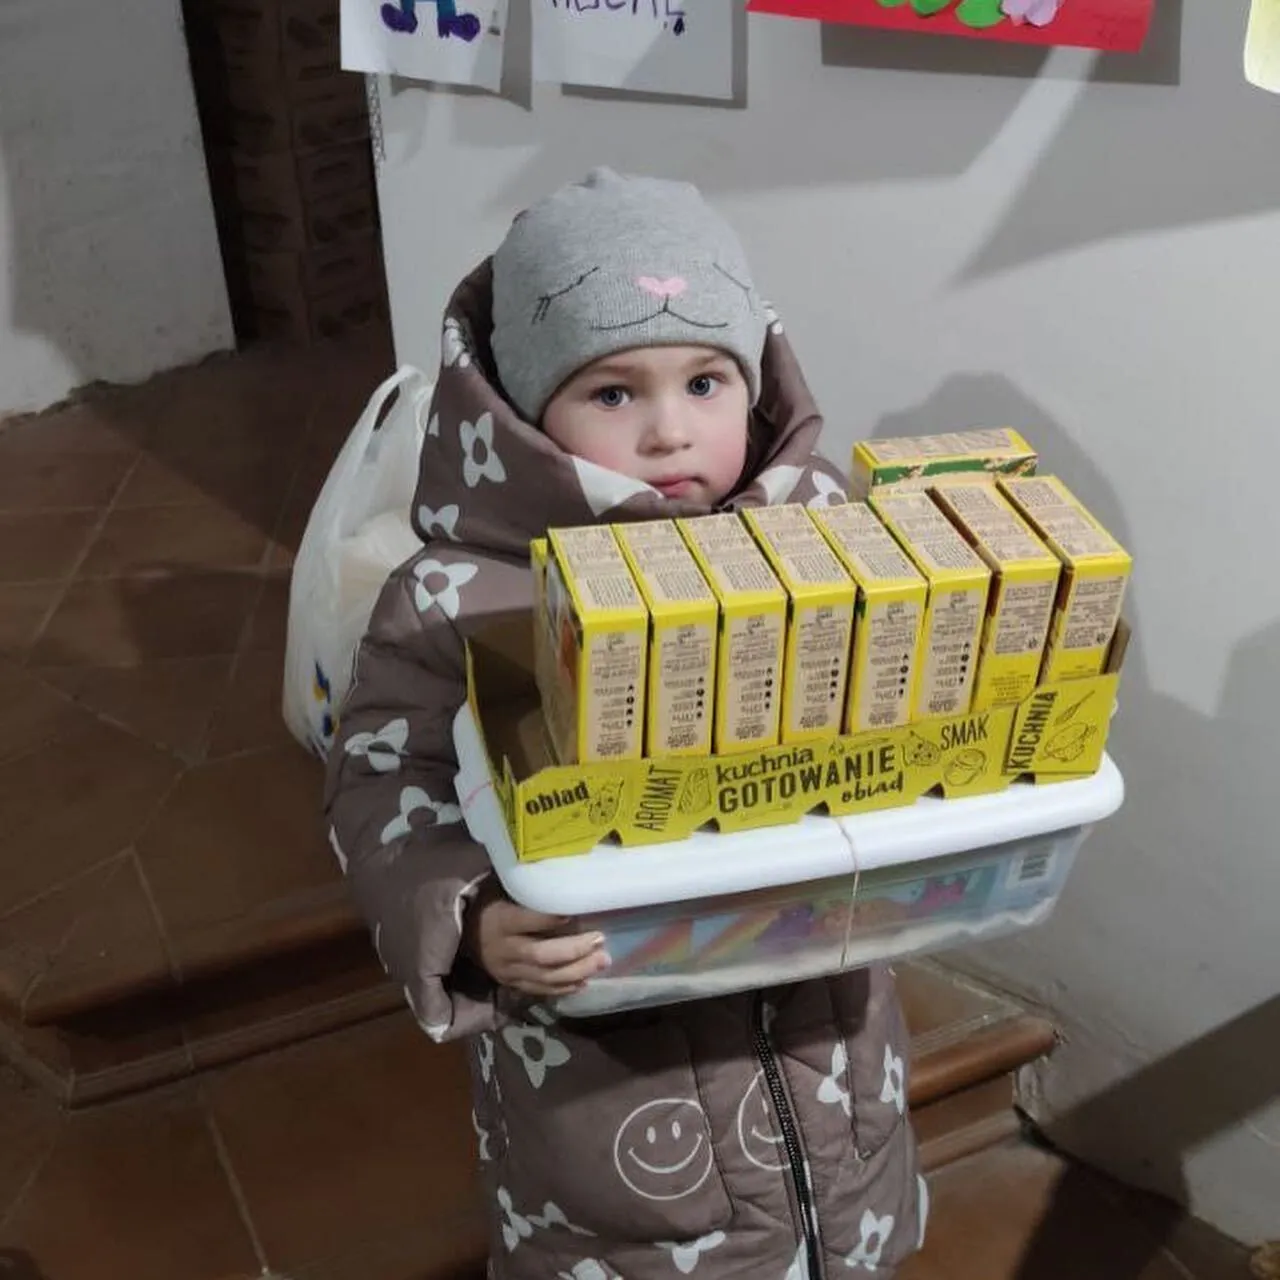 a small child holding a tray of boxes.